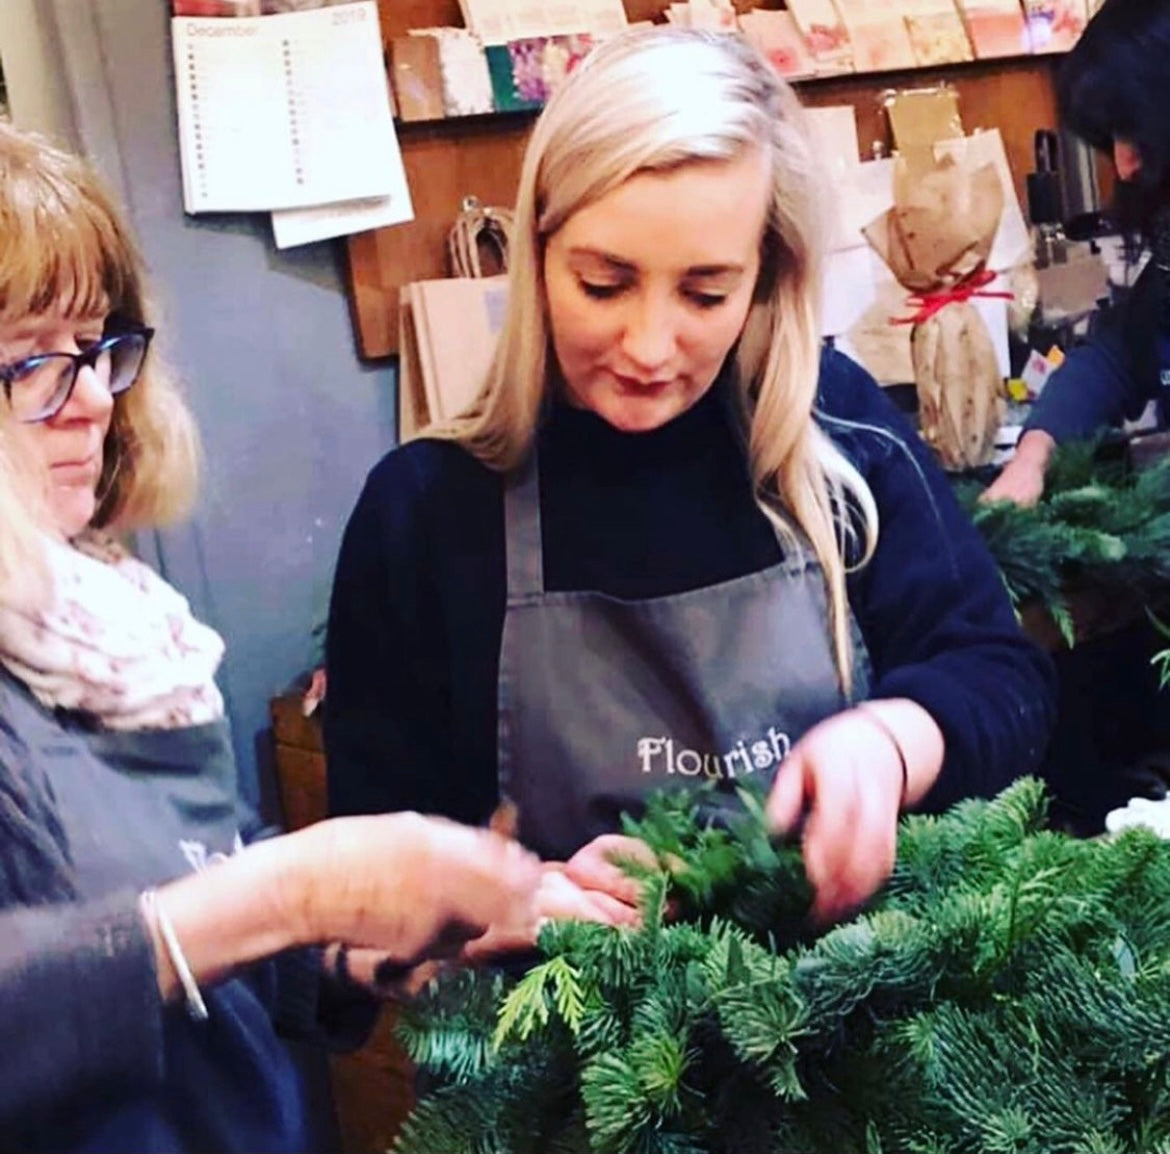 Christmas Wreath Workshop Tuesday 12th Decemember 2pm-4pm